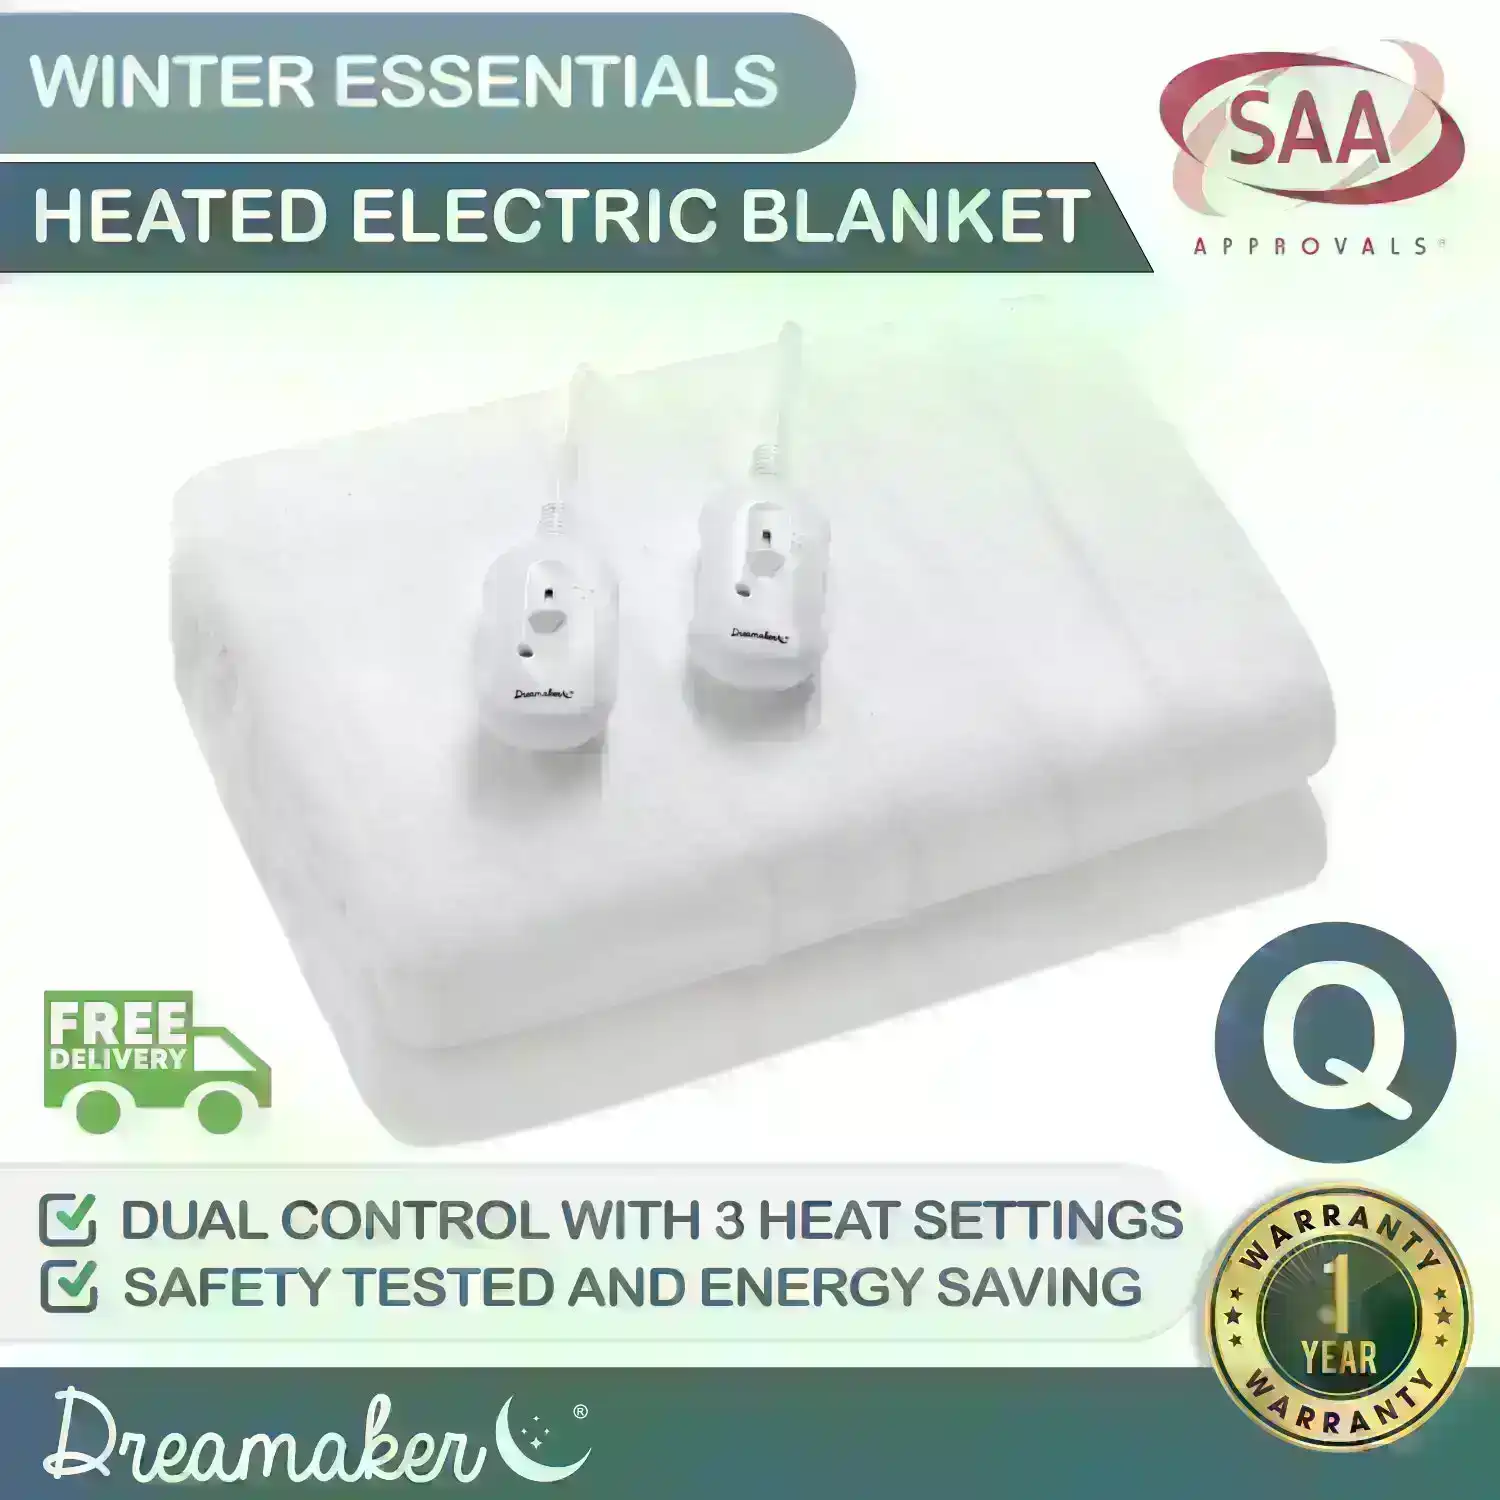 Dreamaker Washable Electric Blanket - Queen Bed